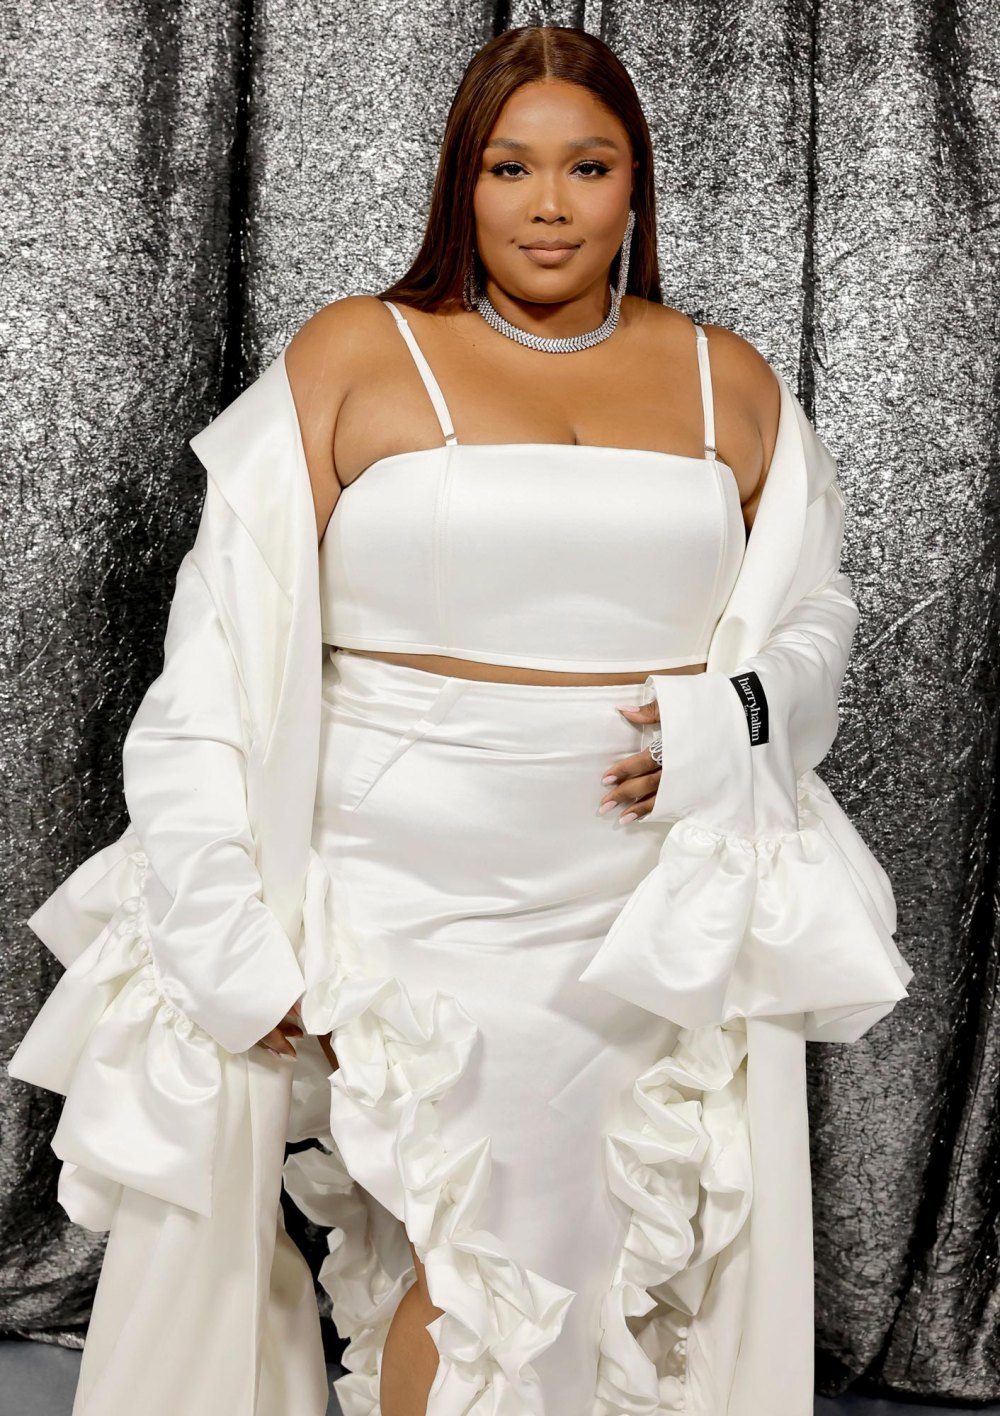 Lizzo Feels the World Doesnt Want Me in It After Being Dragged By Internet